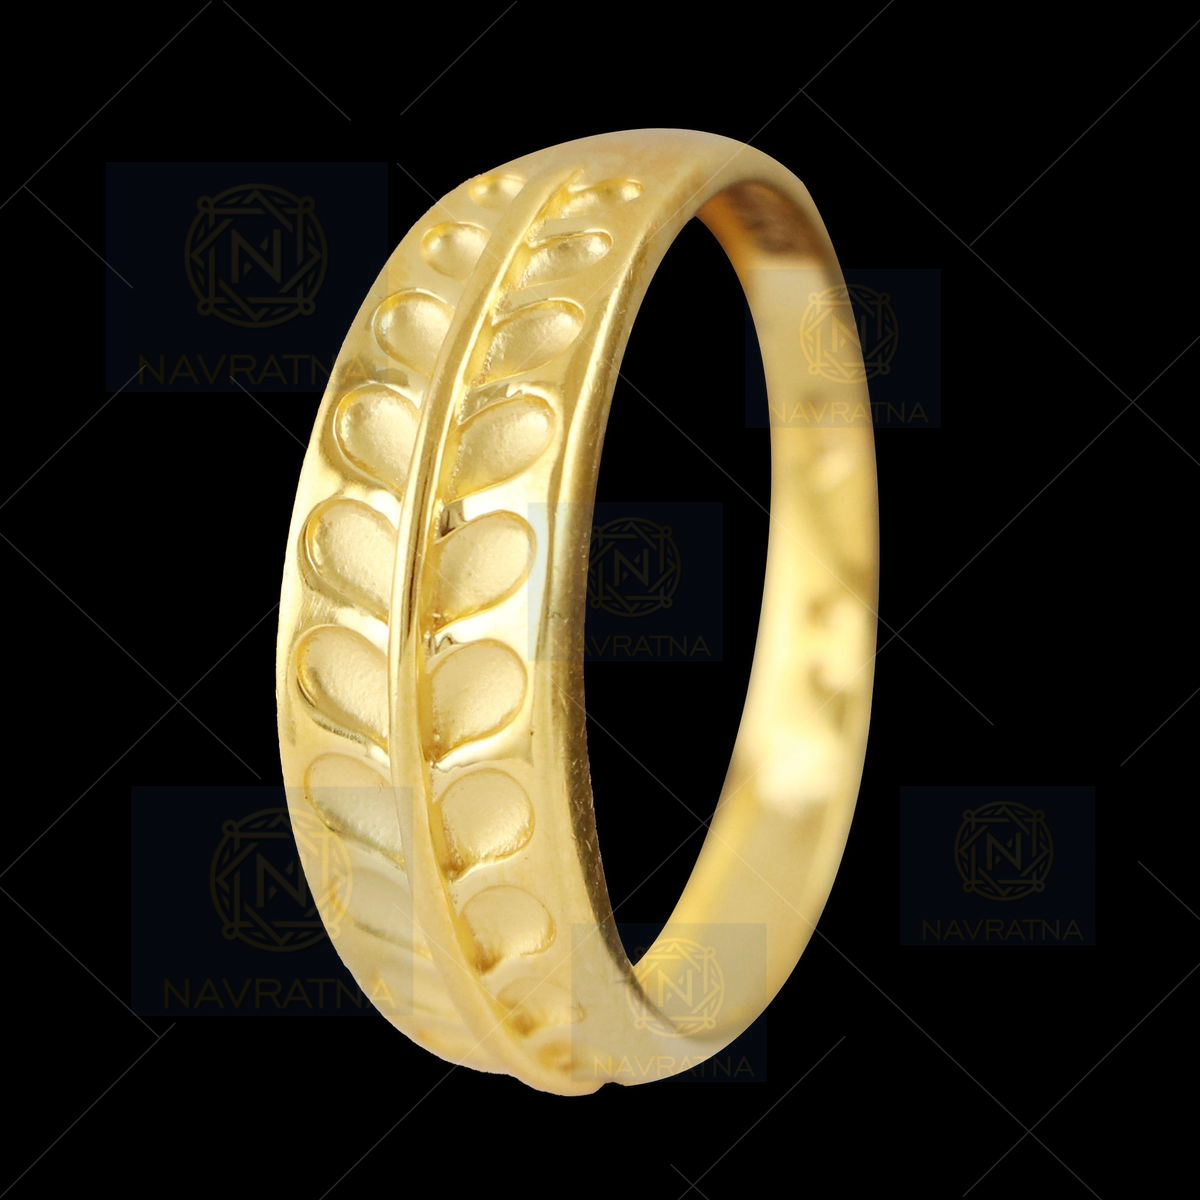 Buy quality 22 Kt Gold Casting Gents Ring in Ahmedabad